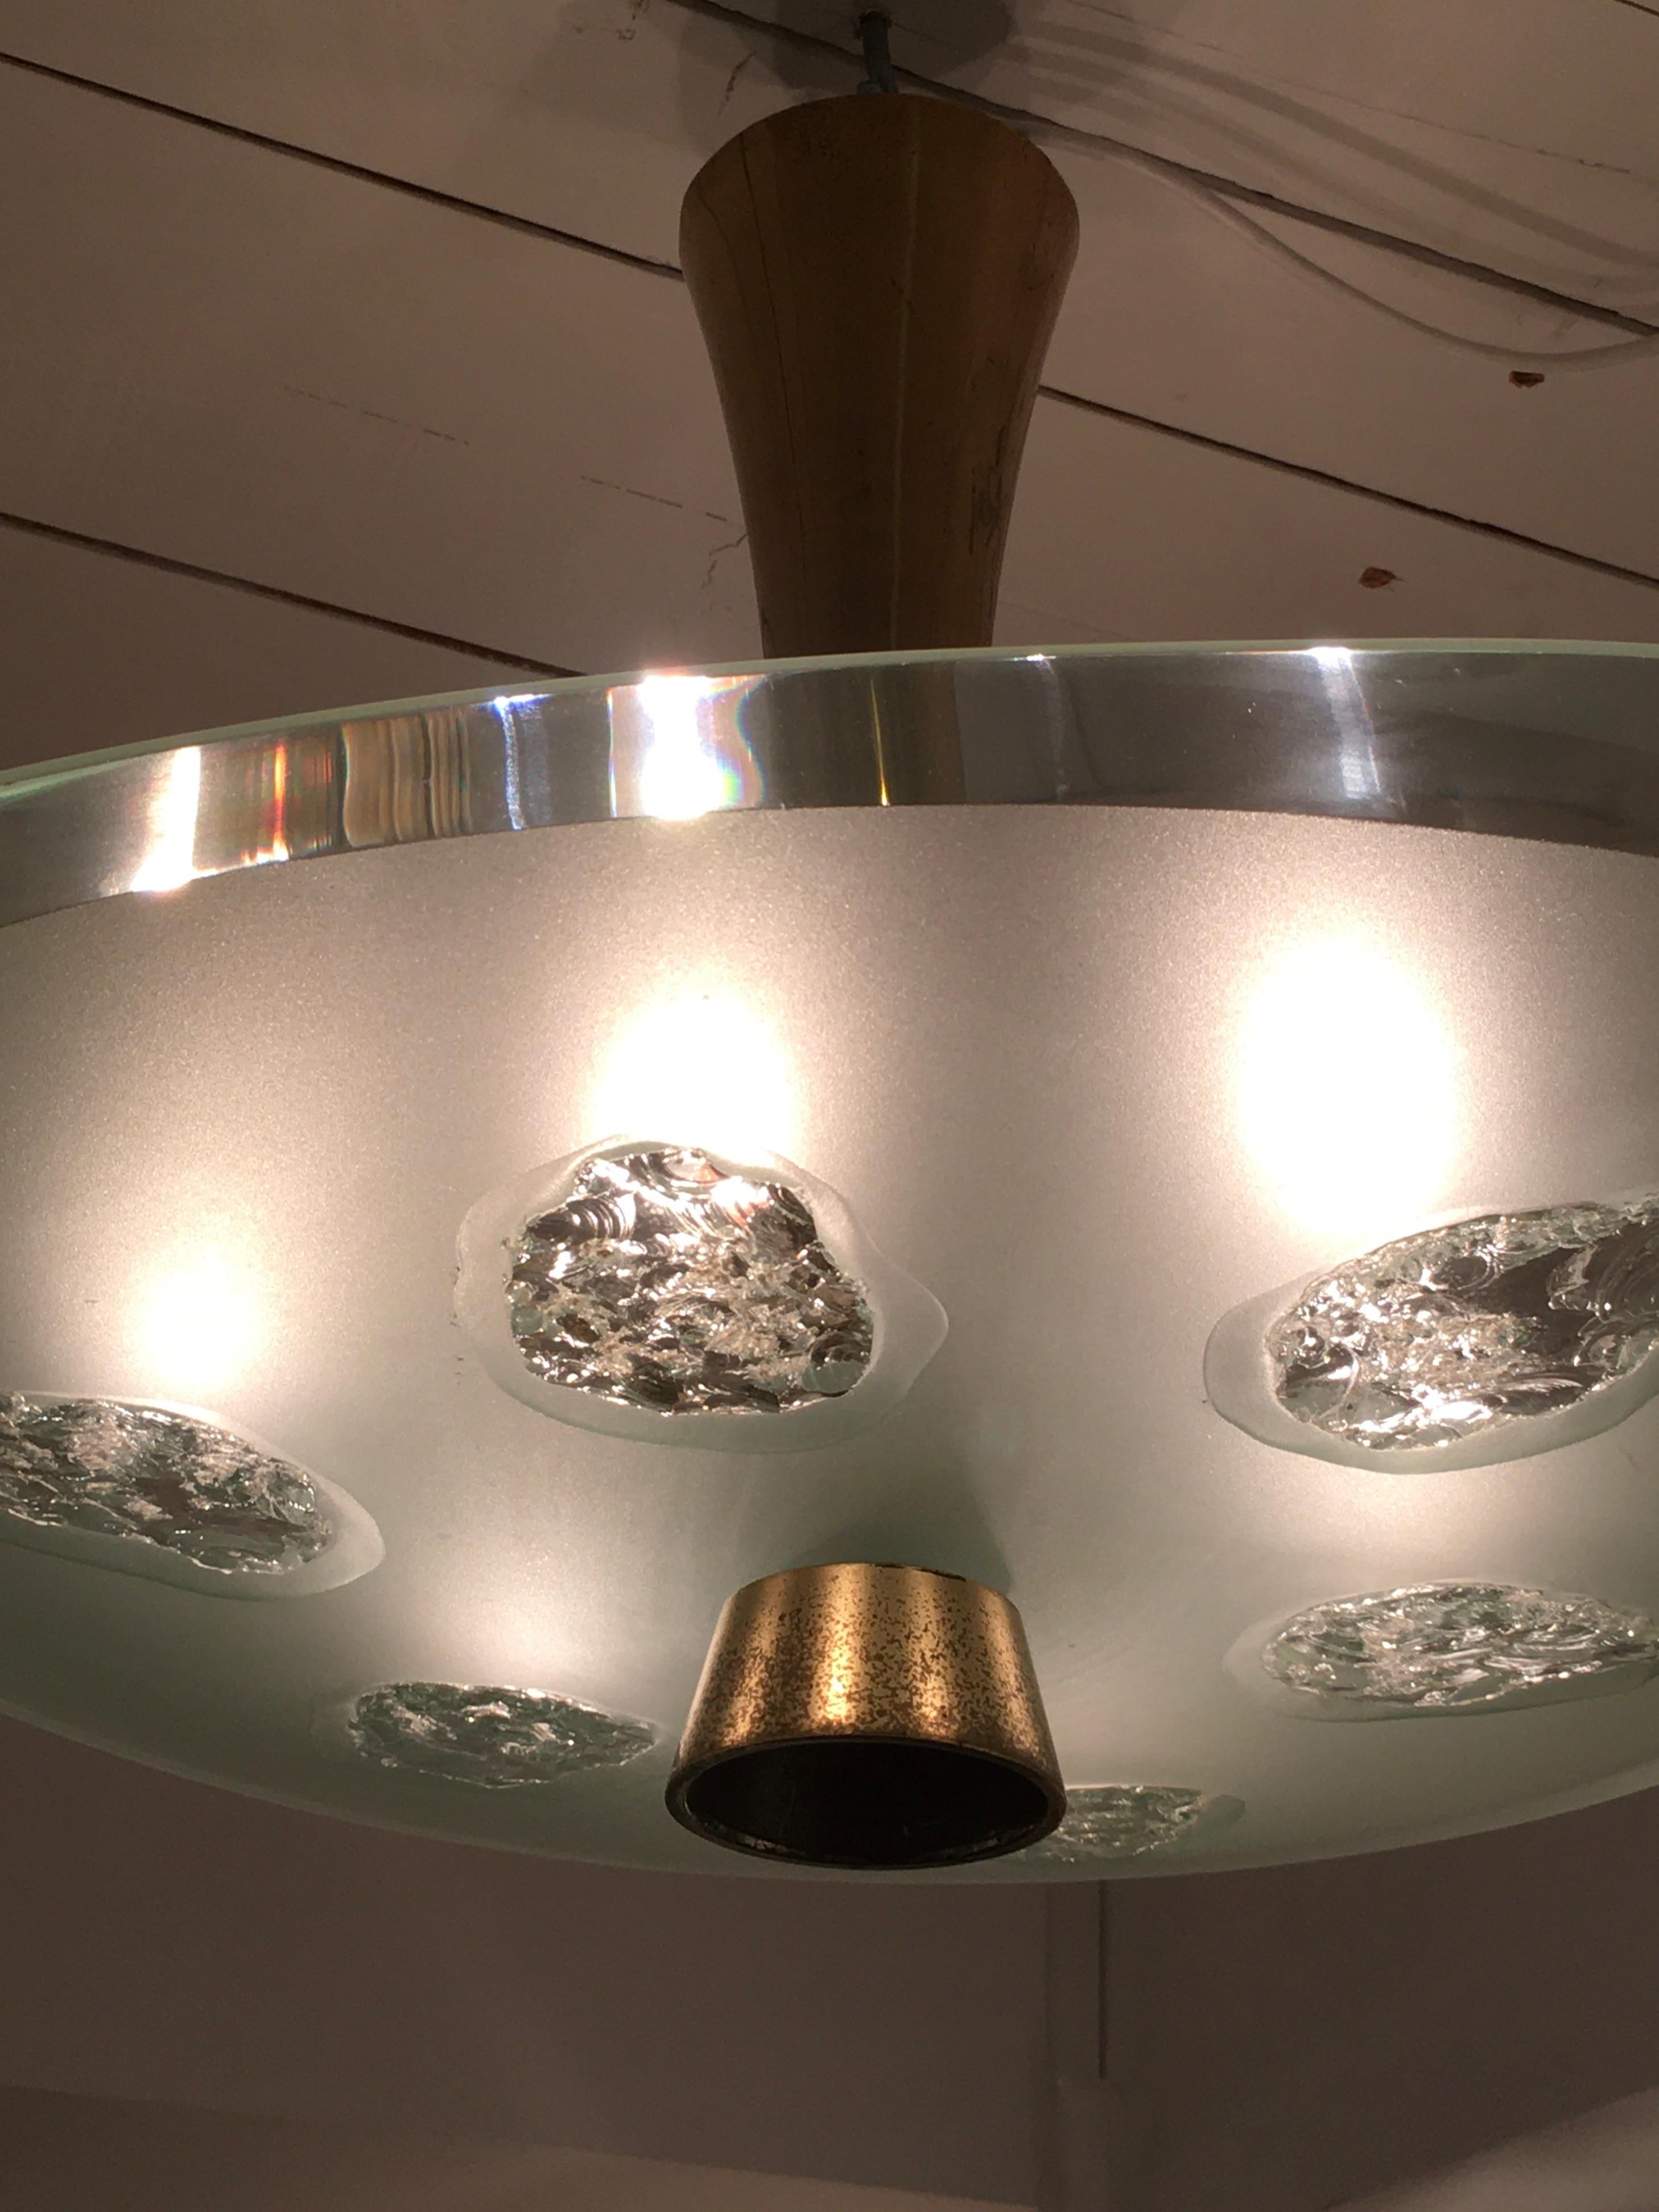 '1748' Model Ceiling Light by Max Ingrand and Dubé for Fontana Arte, Italy, 1957 For Sale 4